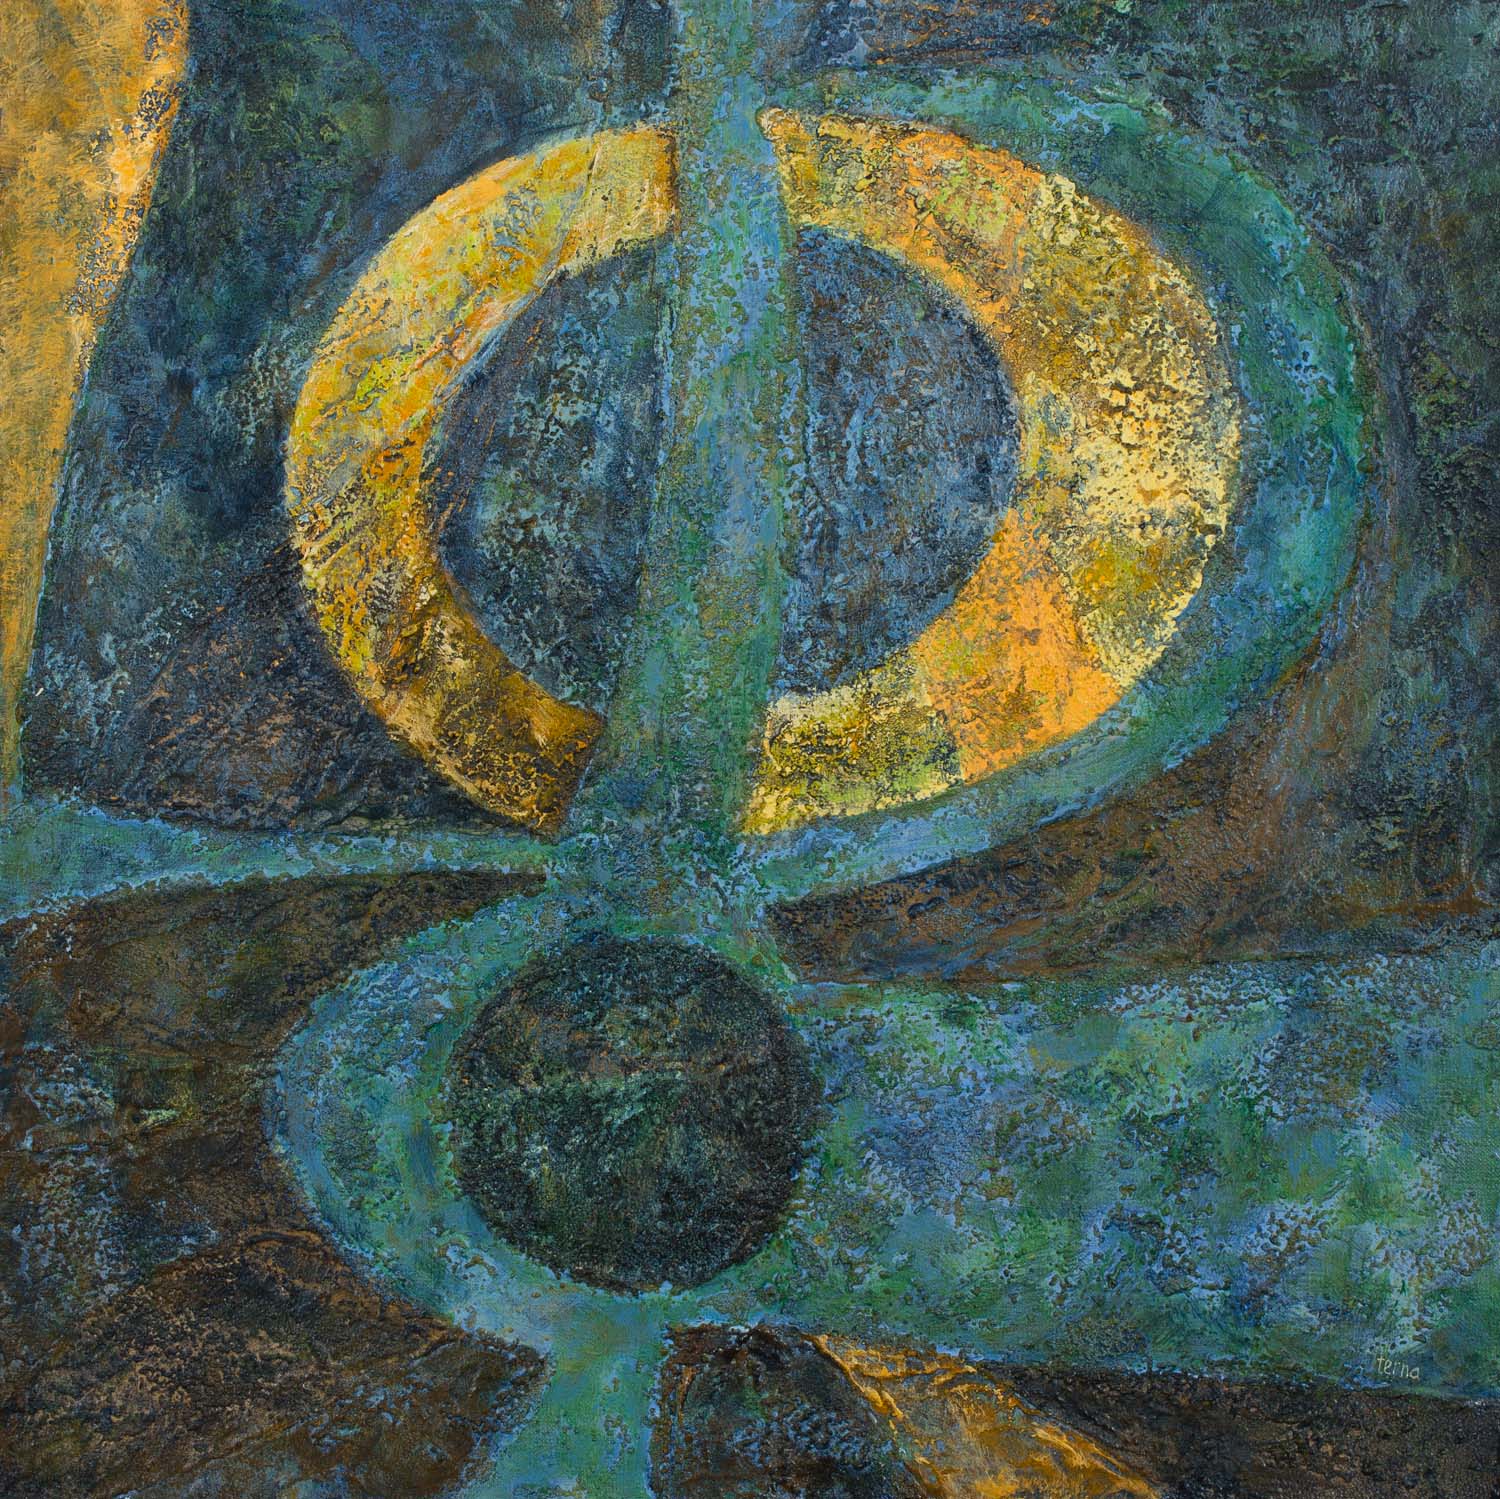   An Affinity for Circles  ,&nbsp;Dec. 1985,&nbsp;Acrylic and aggregate on canvas, 30 x 30 inches  